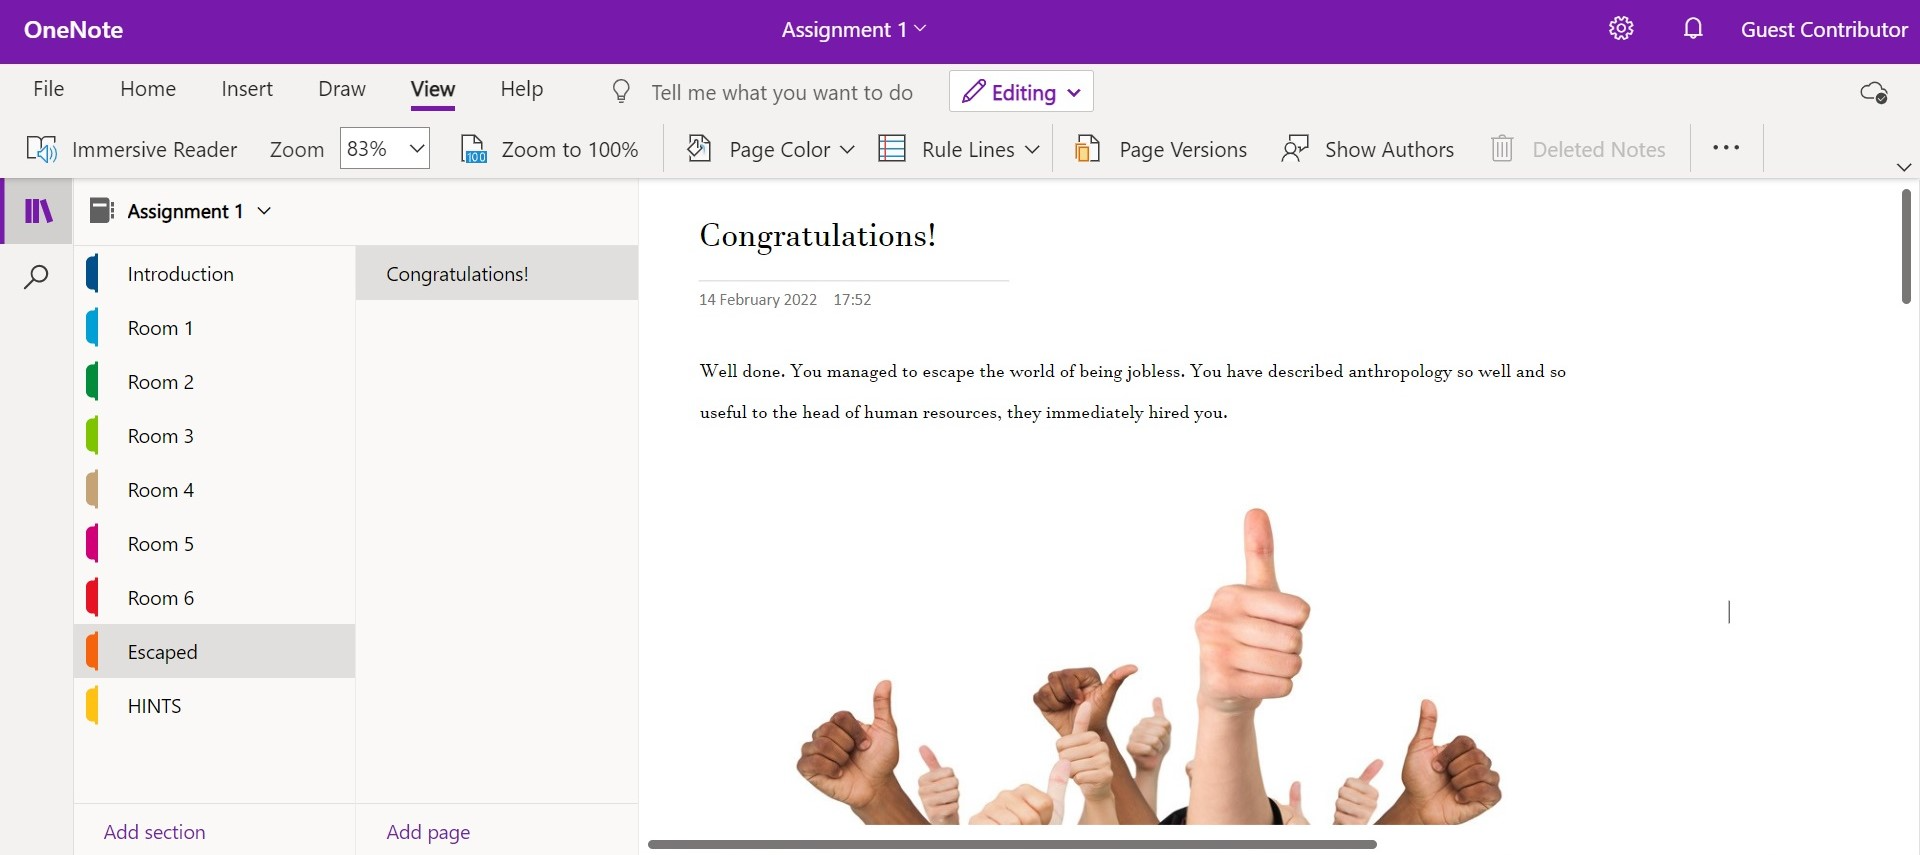 One of the escape rooms created by the students in OneNote (Escaped)